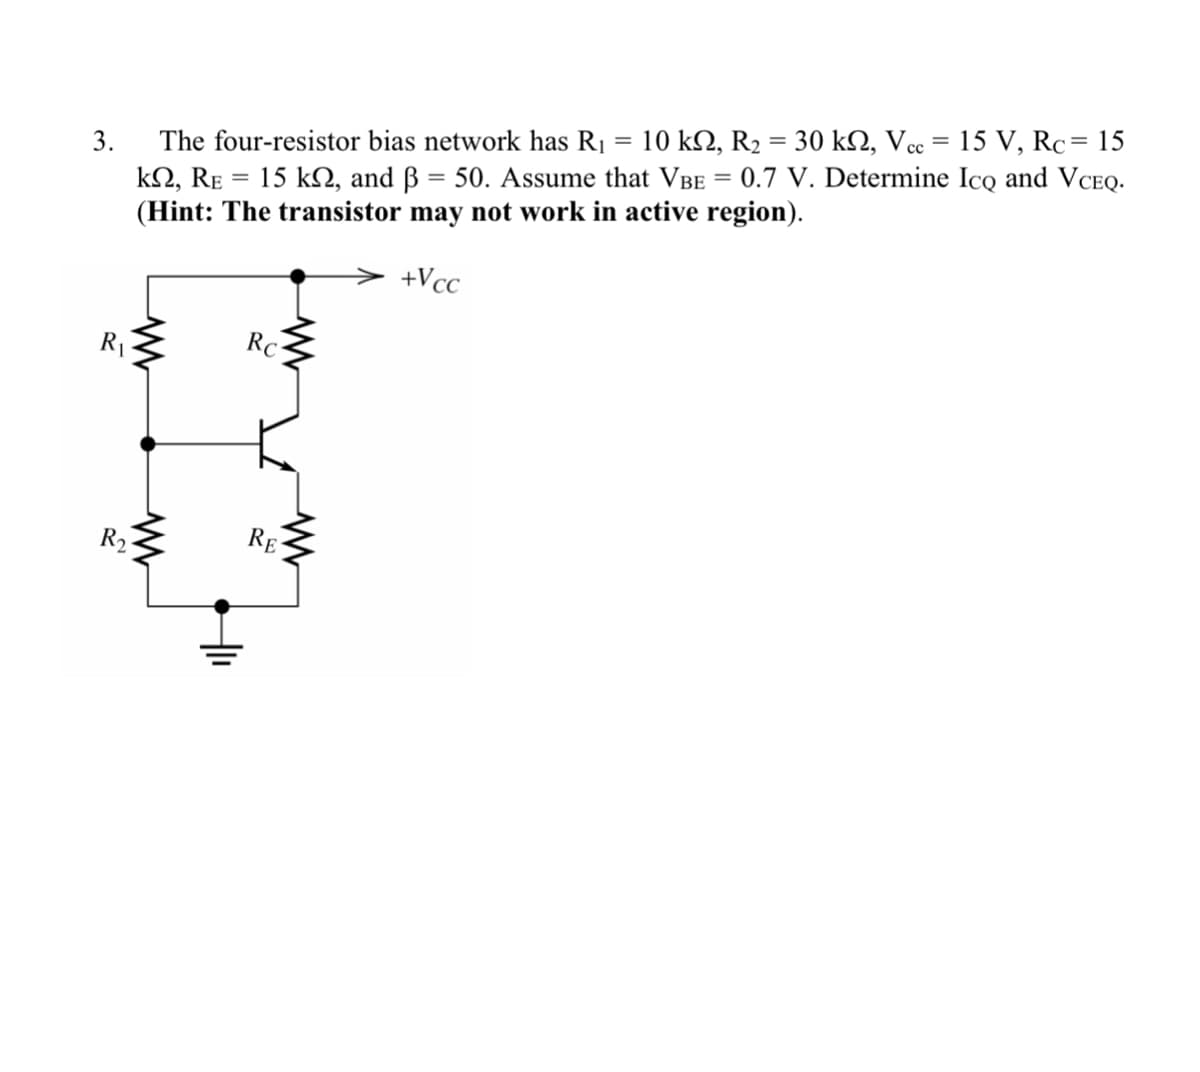 3.
R₁
R₂
=
The four-resistor bias network has R₁ 10 ks, R₂ = 30 k, Vcc= 15 V, Rc = 15
kn, RE = 15 kn, and ß = 50. Assume that VBE = 0.7 V. Determine Ico and VCEQ.
(Hint: The transistor may not work in active region).
+Vcc
www
+1₁
www
Rc
RE